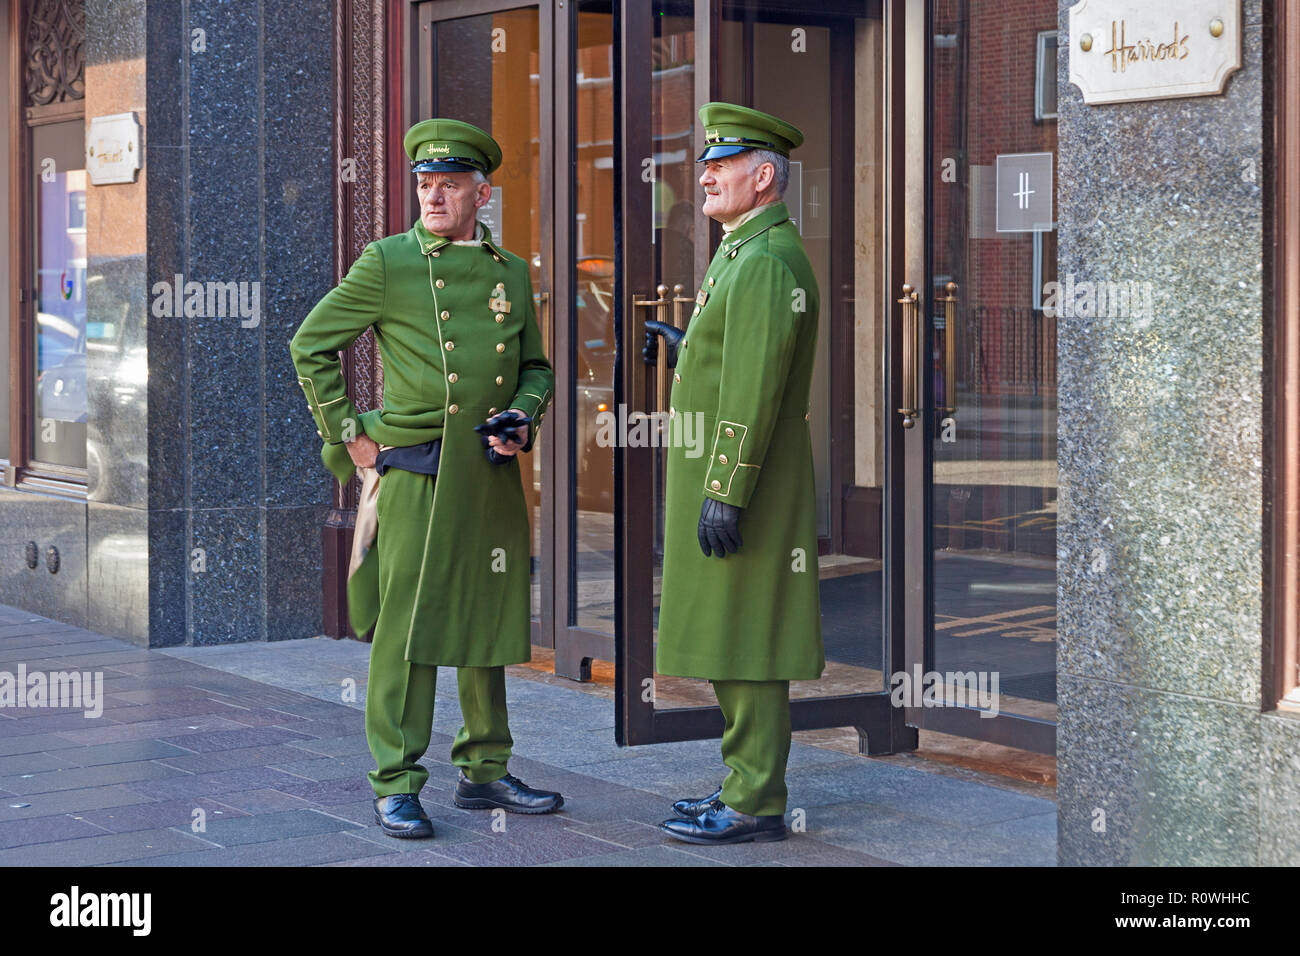 London, Knightsbridge.  Uniformed doormen resting from their duties at the entrance to Harrods department store. Stock Photo